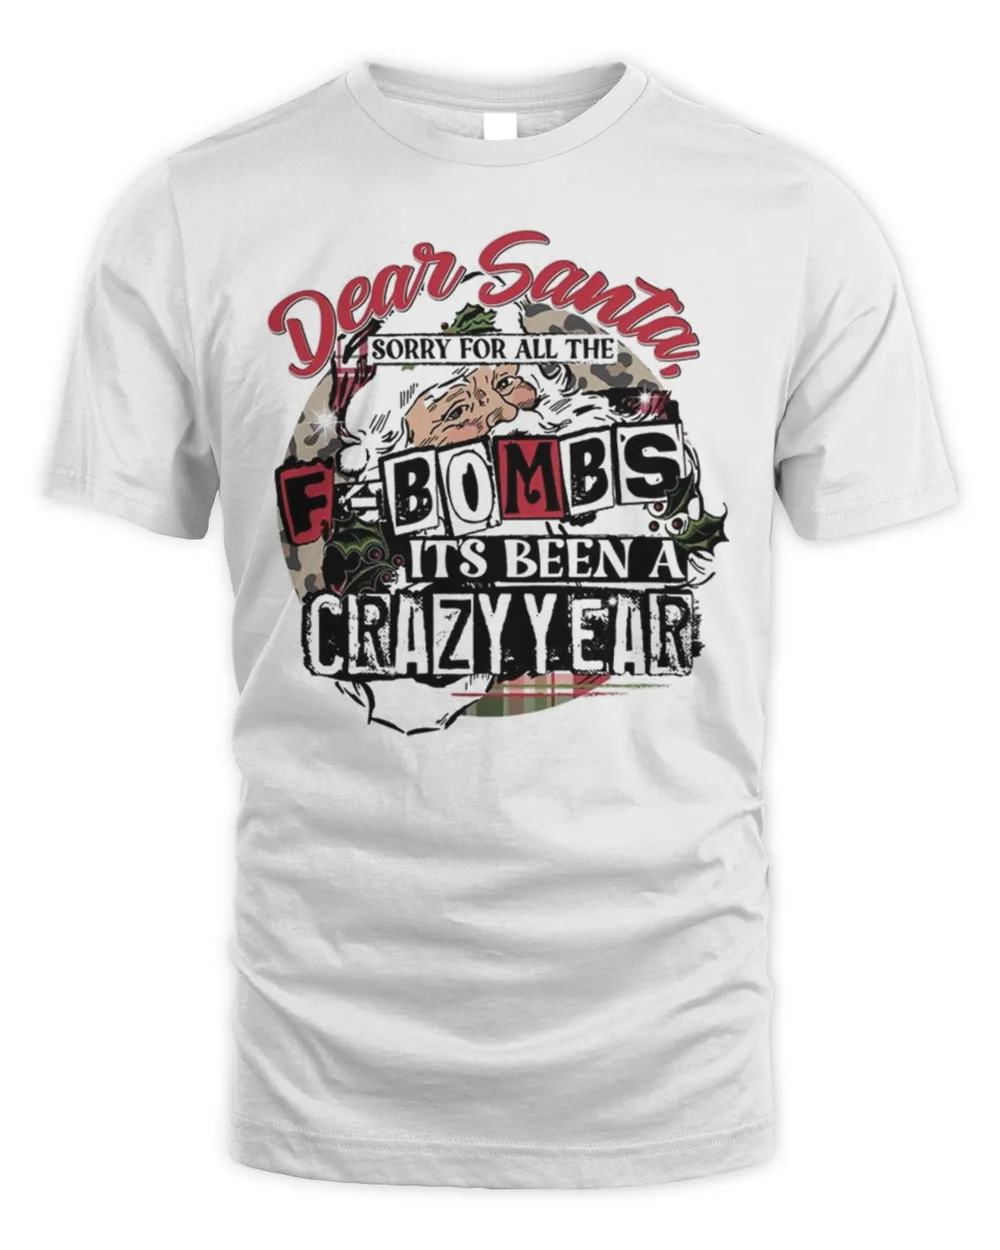 Dear Santa Sorry For All The Fbombs It’s Been A Crazy Year Christmas Shirt